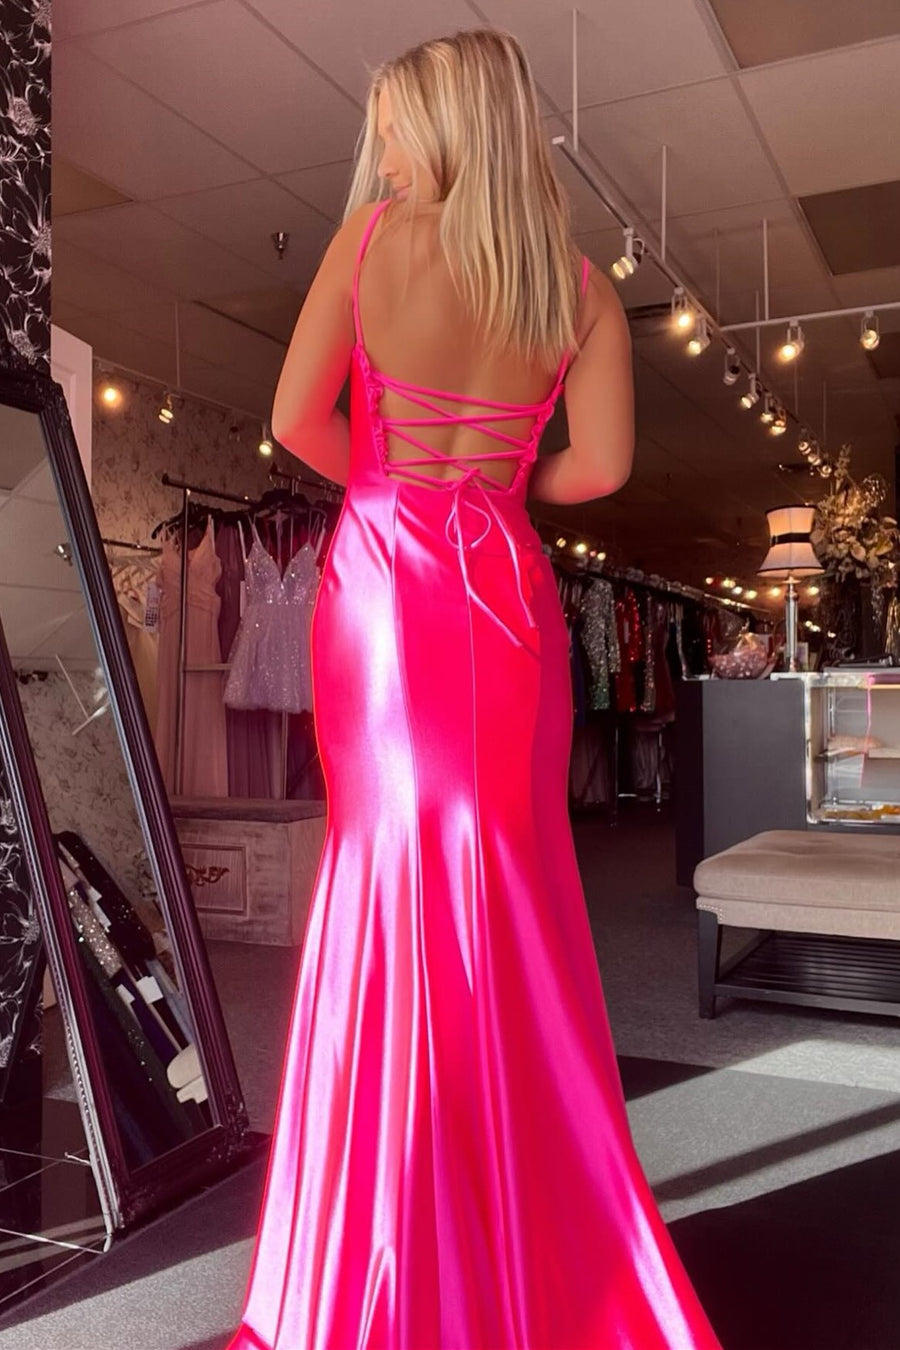 Pink Lace-Up Back Ruffle Mermaid Long Prom Dress with Slit